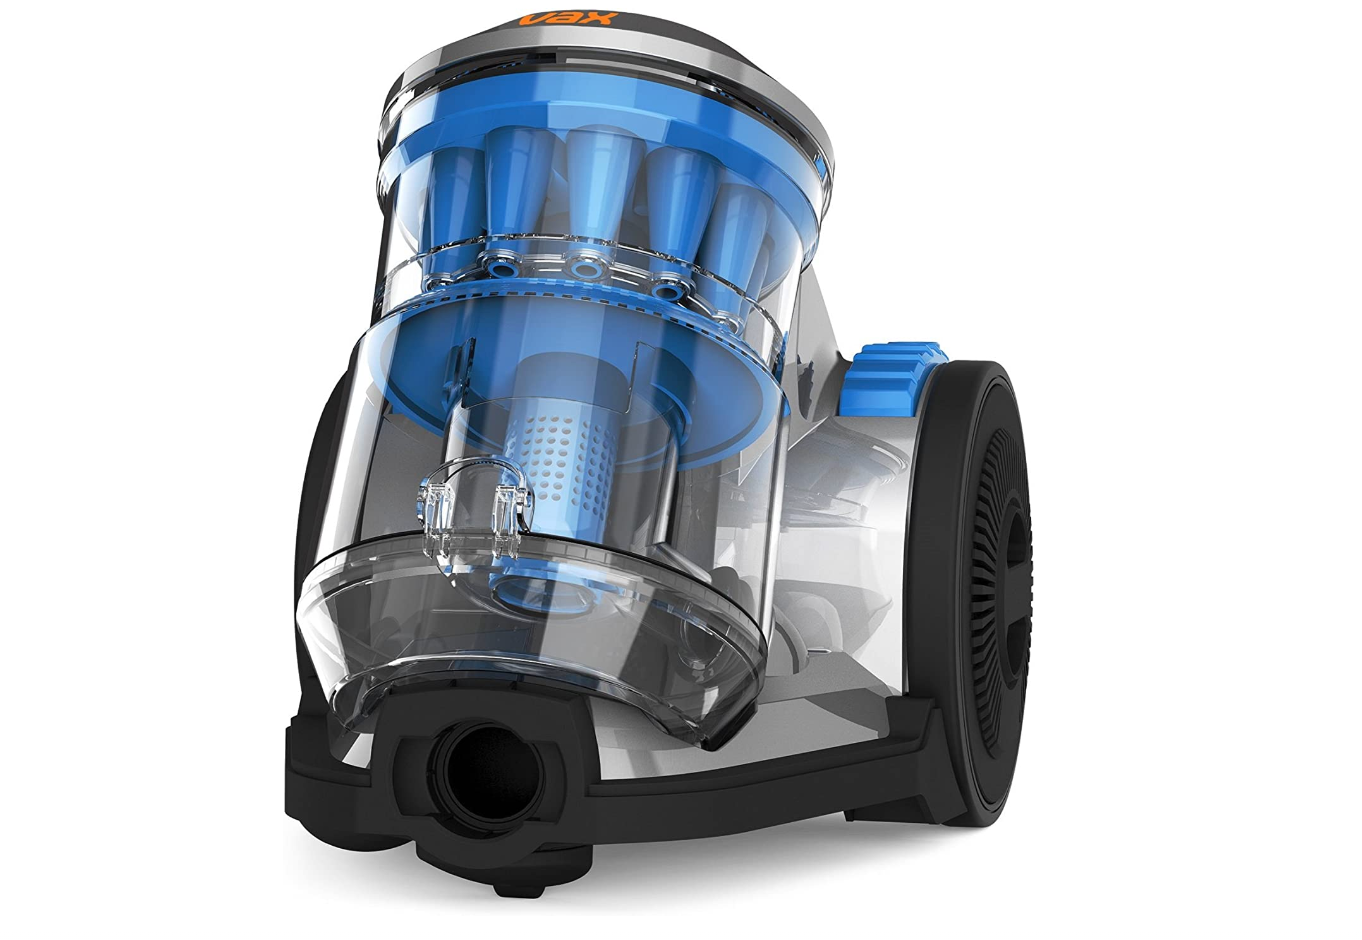 Vax CCQSASV1P1 product image of a clean vacuum with blue components inside and black details.